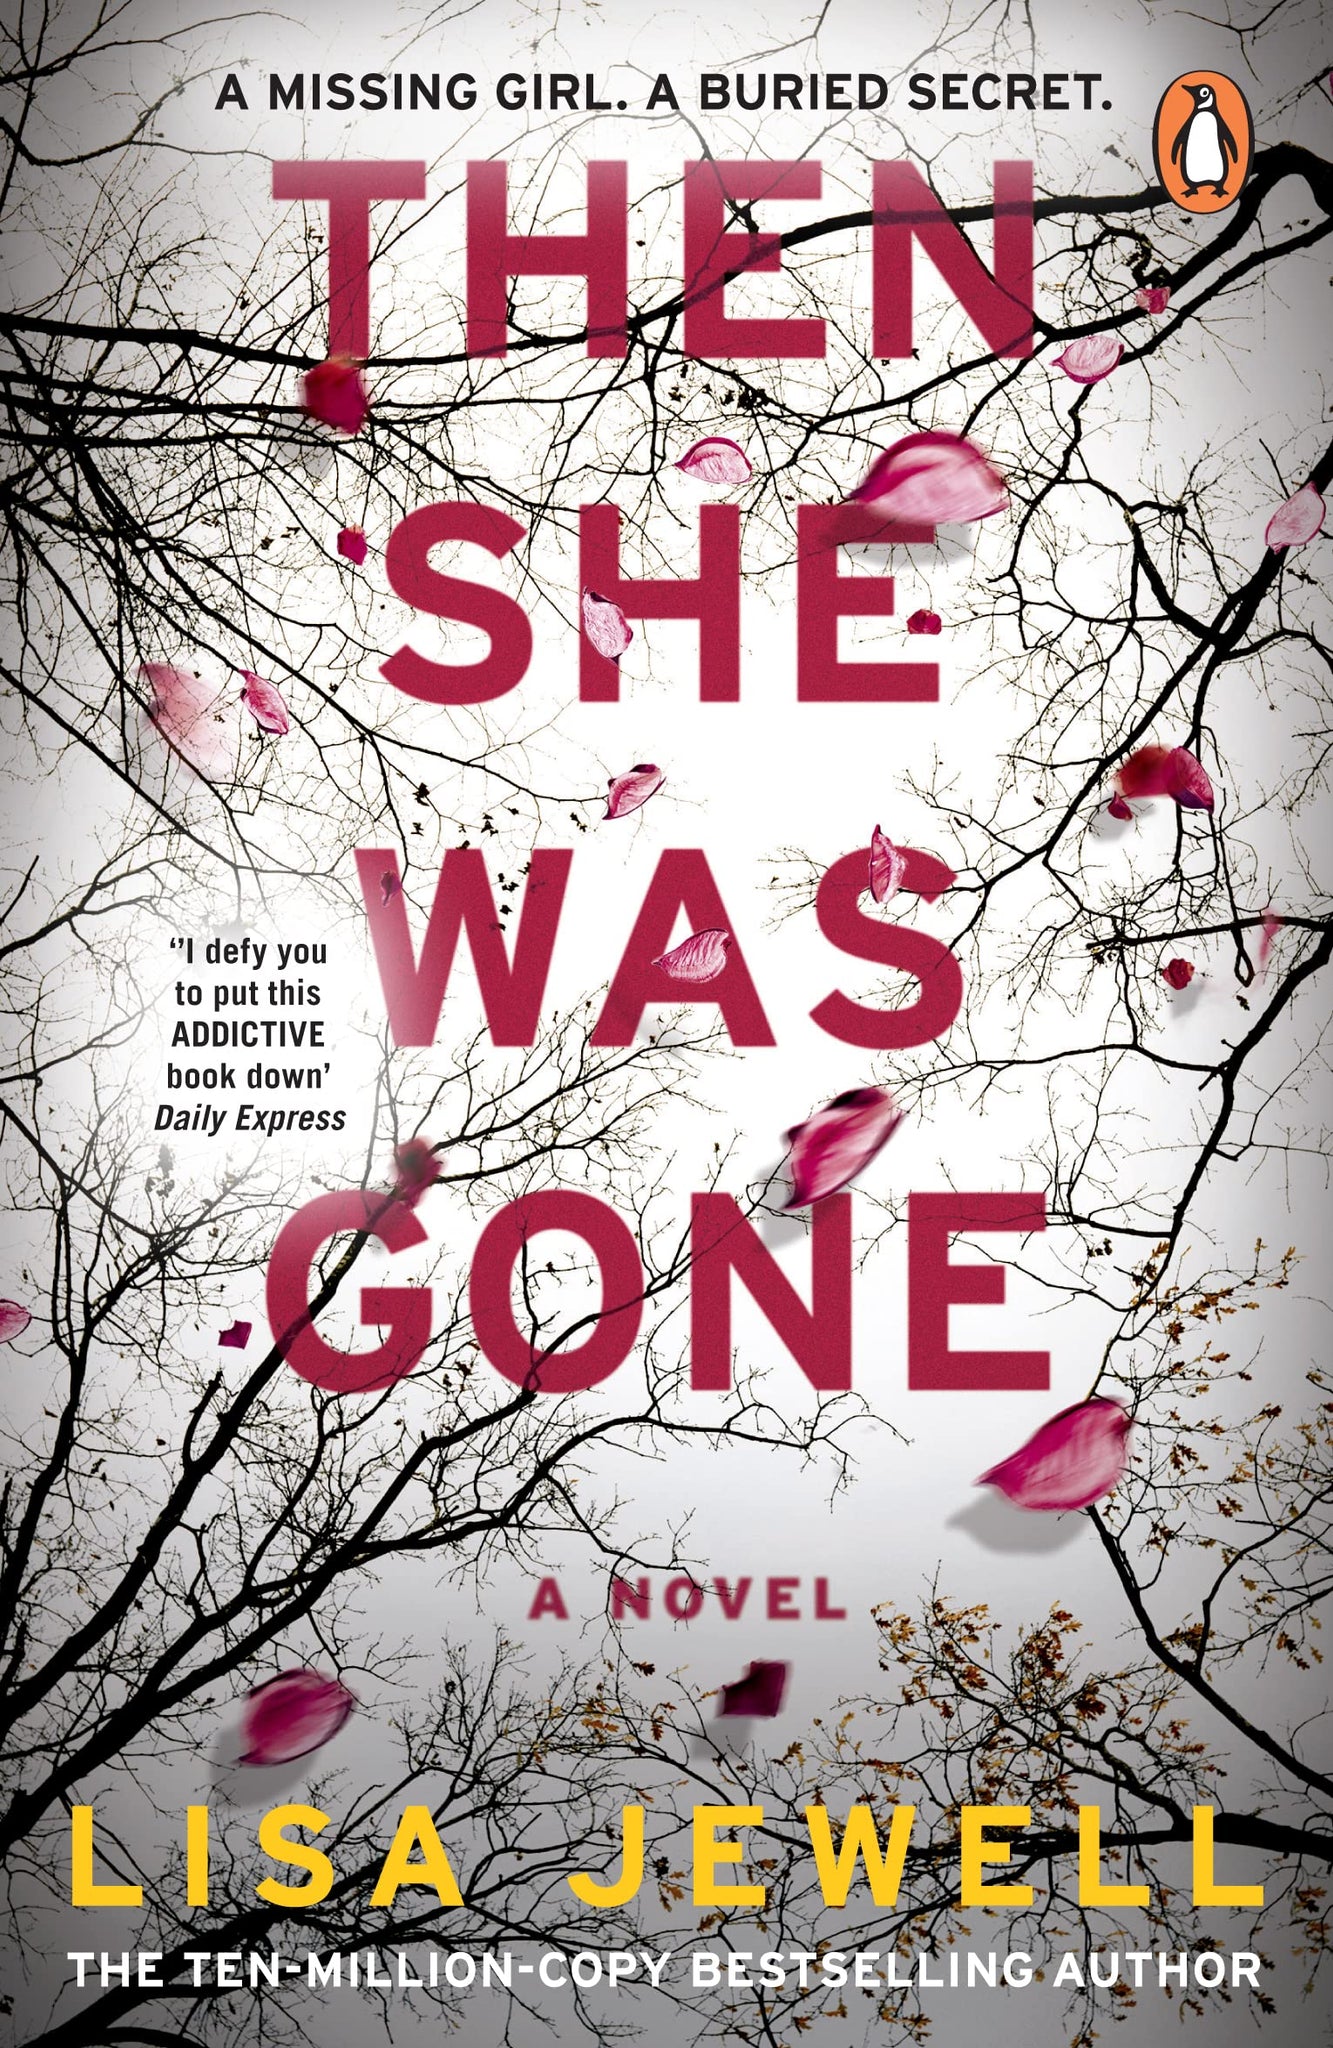 Then She Was Gone - Paperback